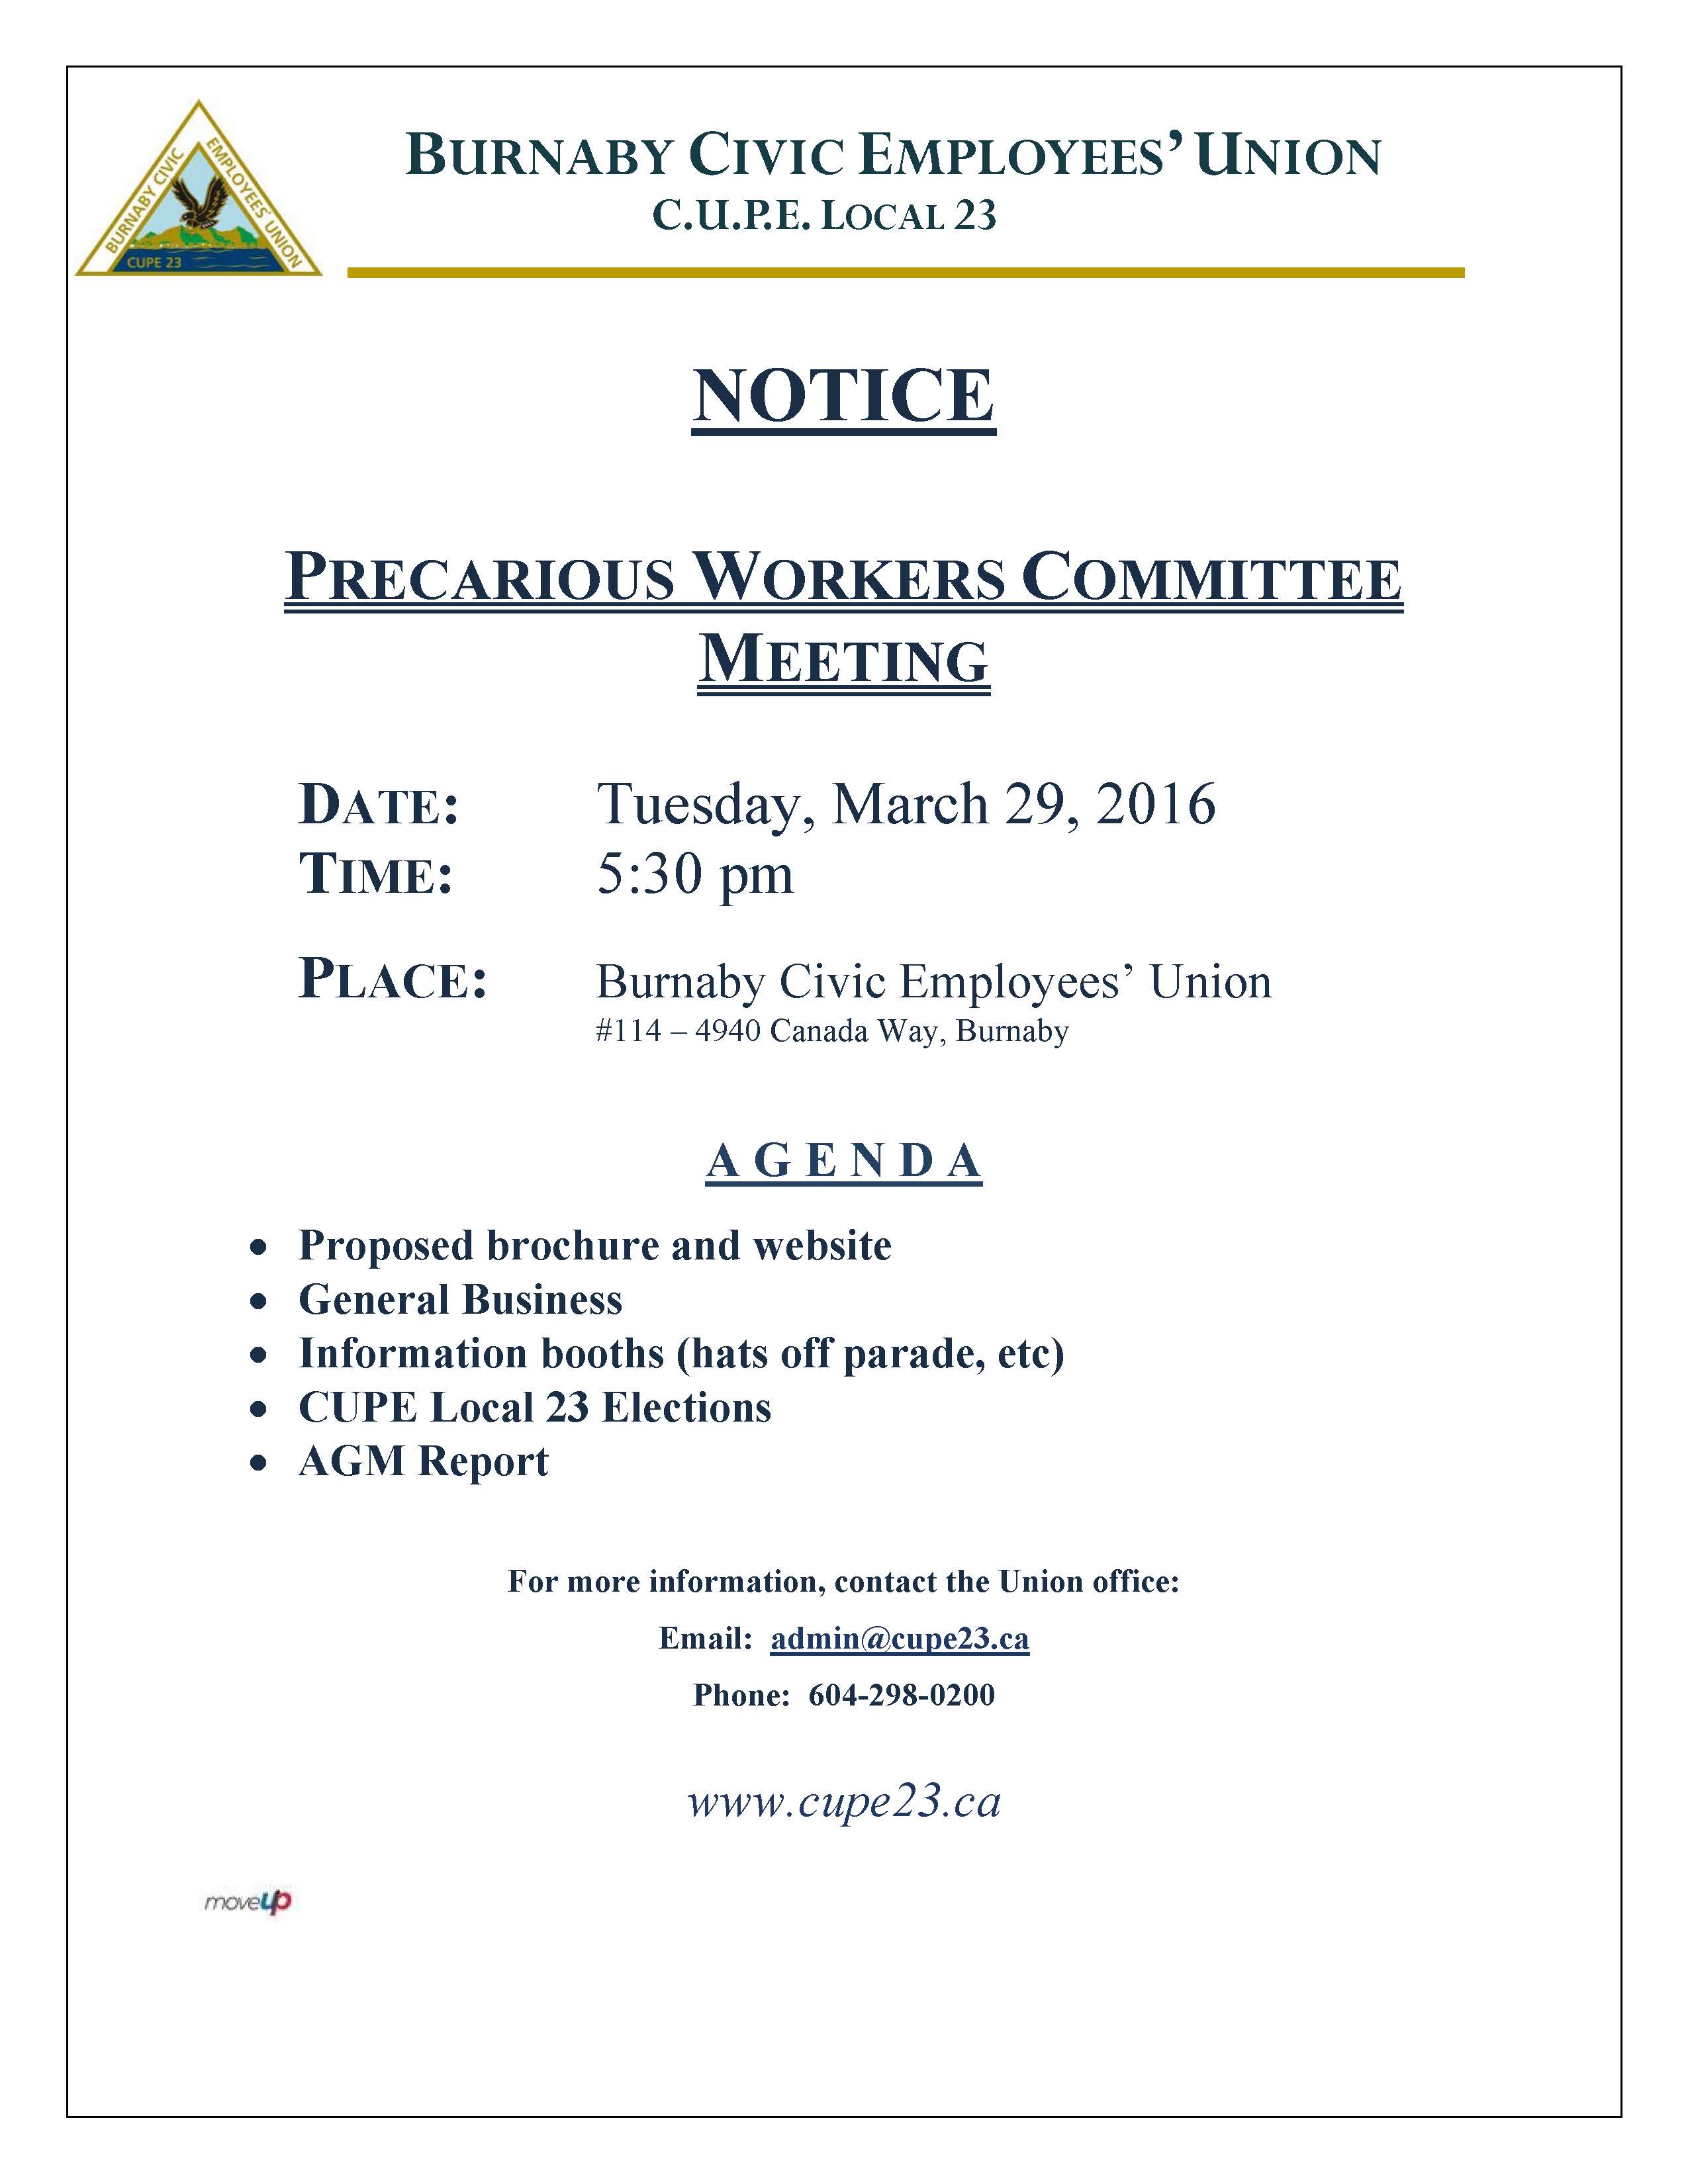 PWC Meeting Notice 160329 CUPE 23